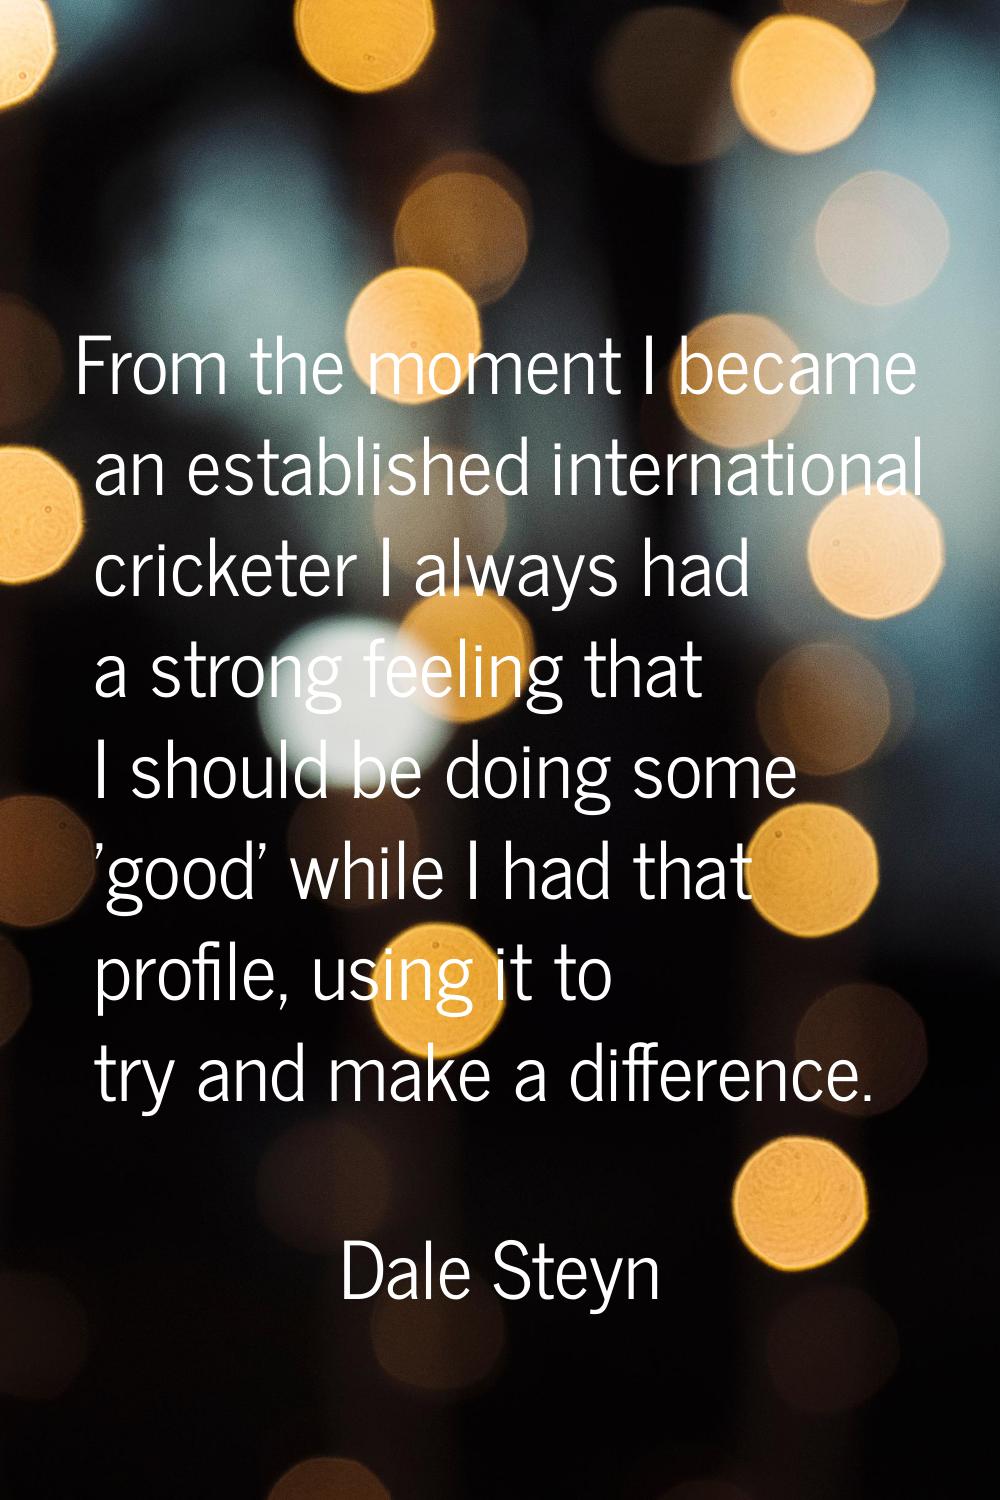 From the moment I became an established international cricketer I always had a strong feeling that 